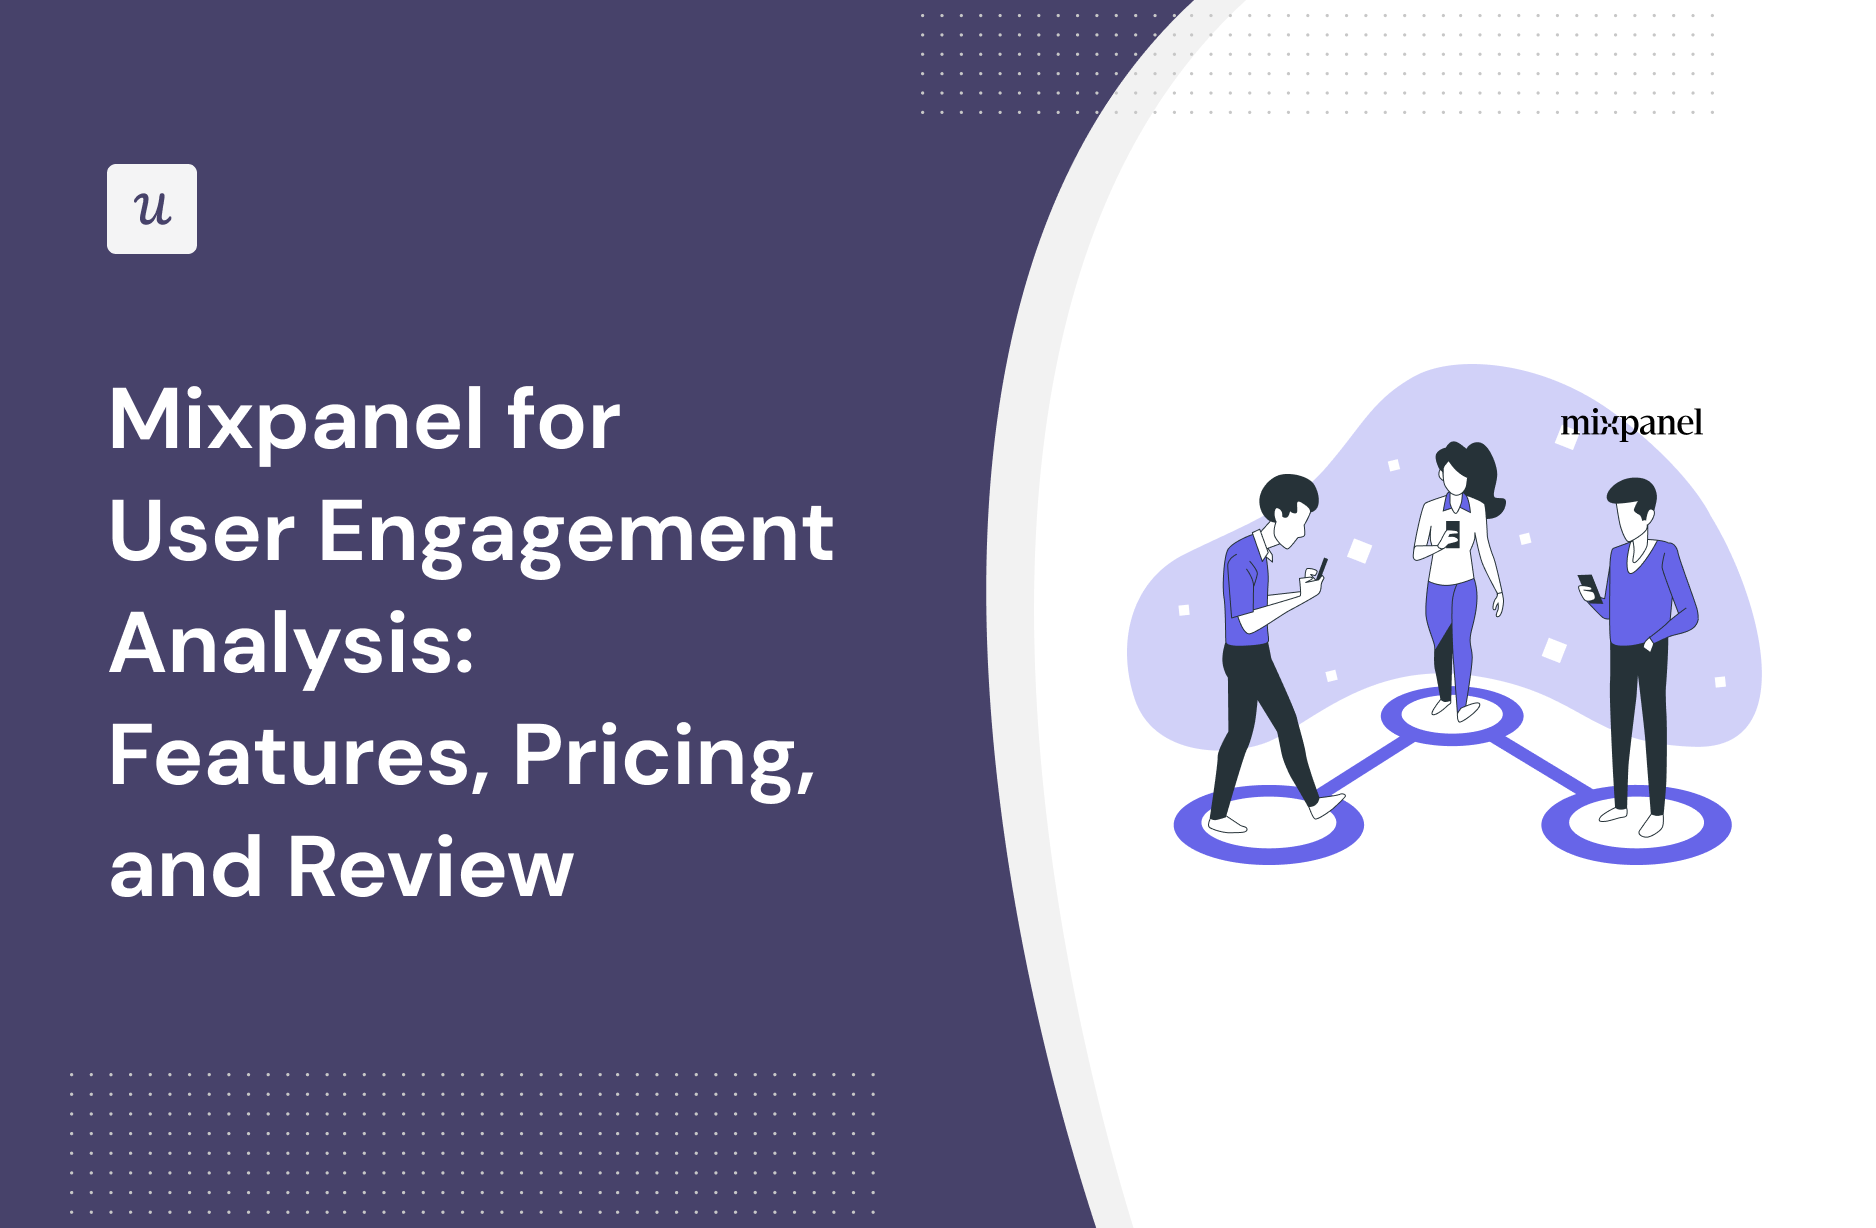 Mixpanel for User engagement analysis: Features, Pricing, and Review